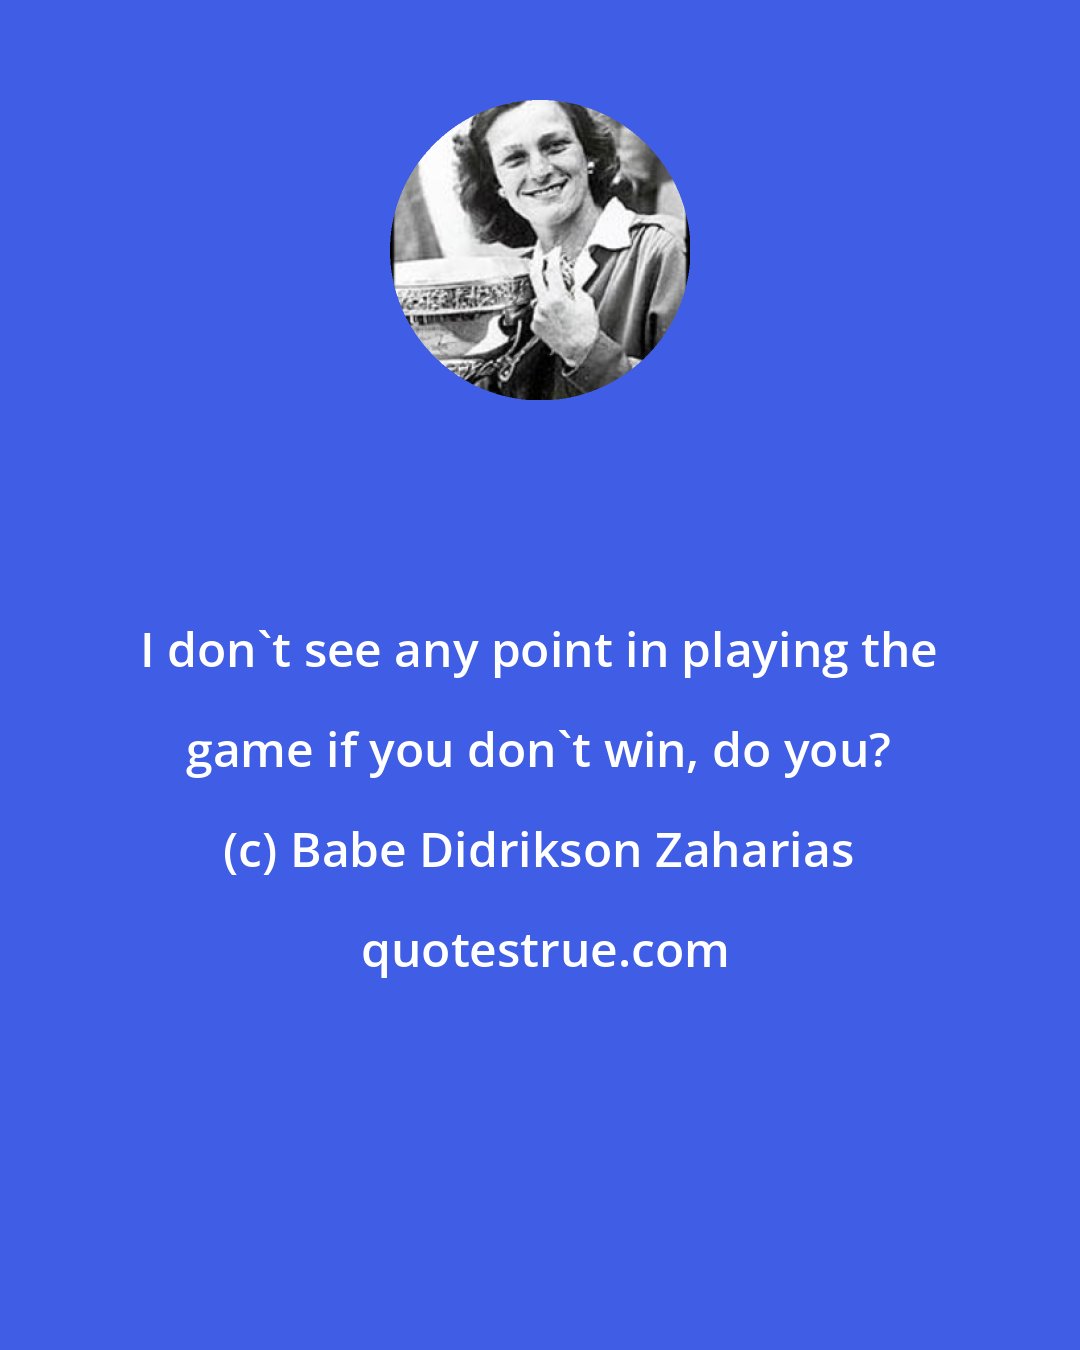 Babe Didrikson Zaharias: I don't see any point in playing the game if you don't win, do you?